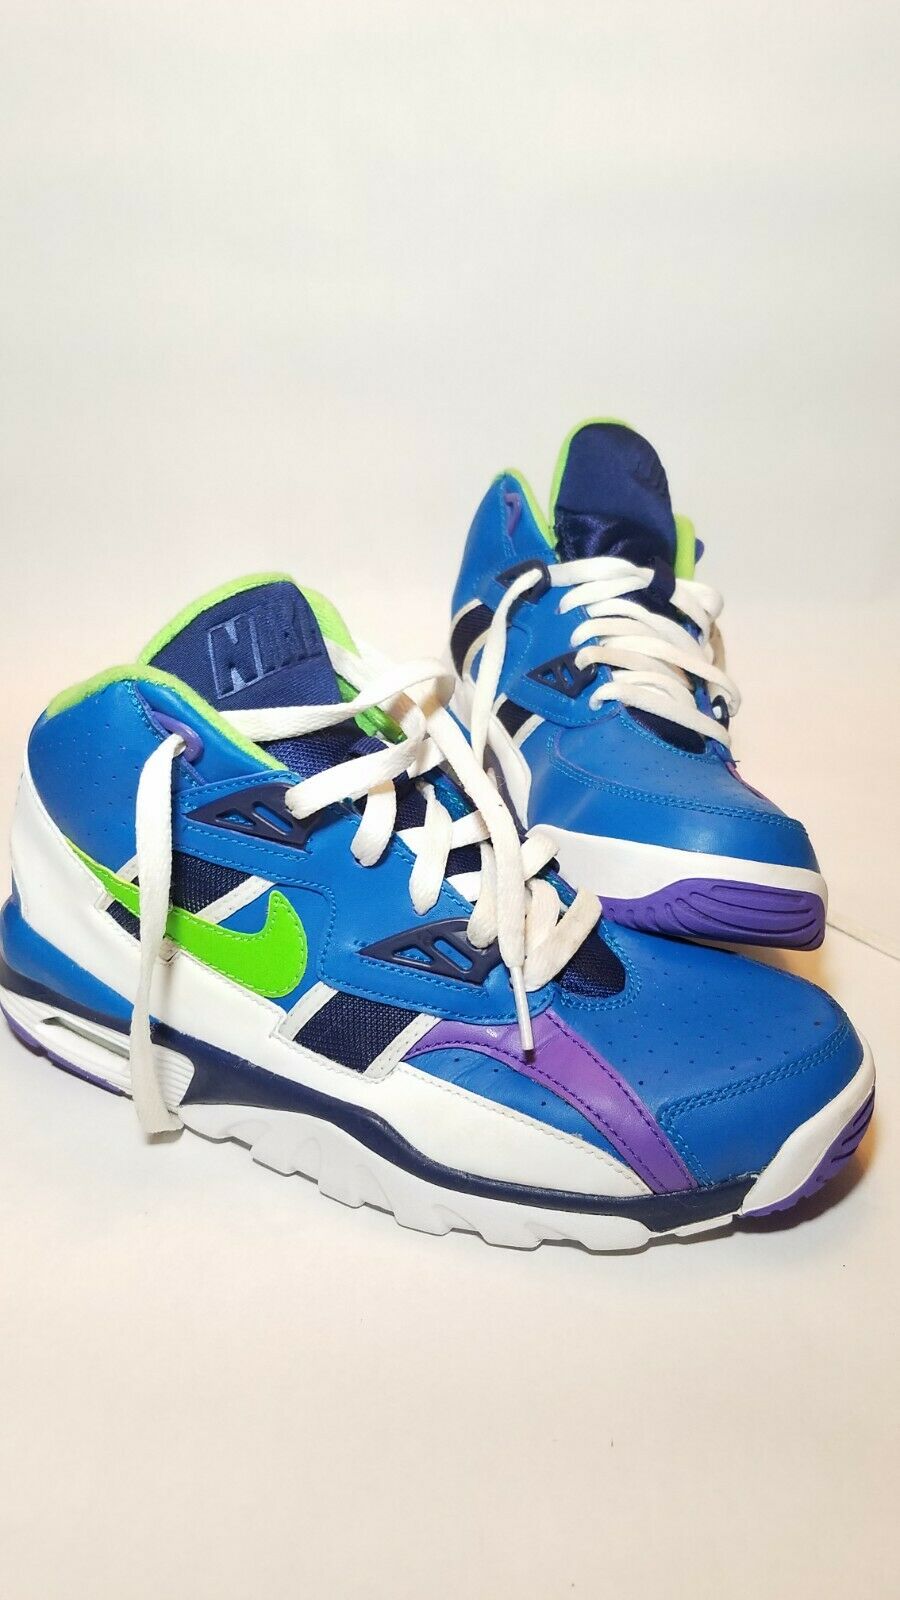 Nike Air Trainer GS Shoes Youth 6.5 Imperial Blue / Scream Green CJ0580-400